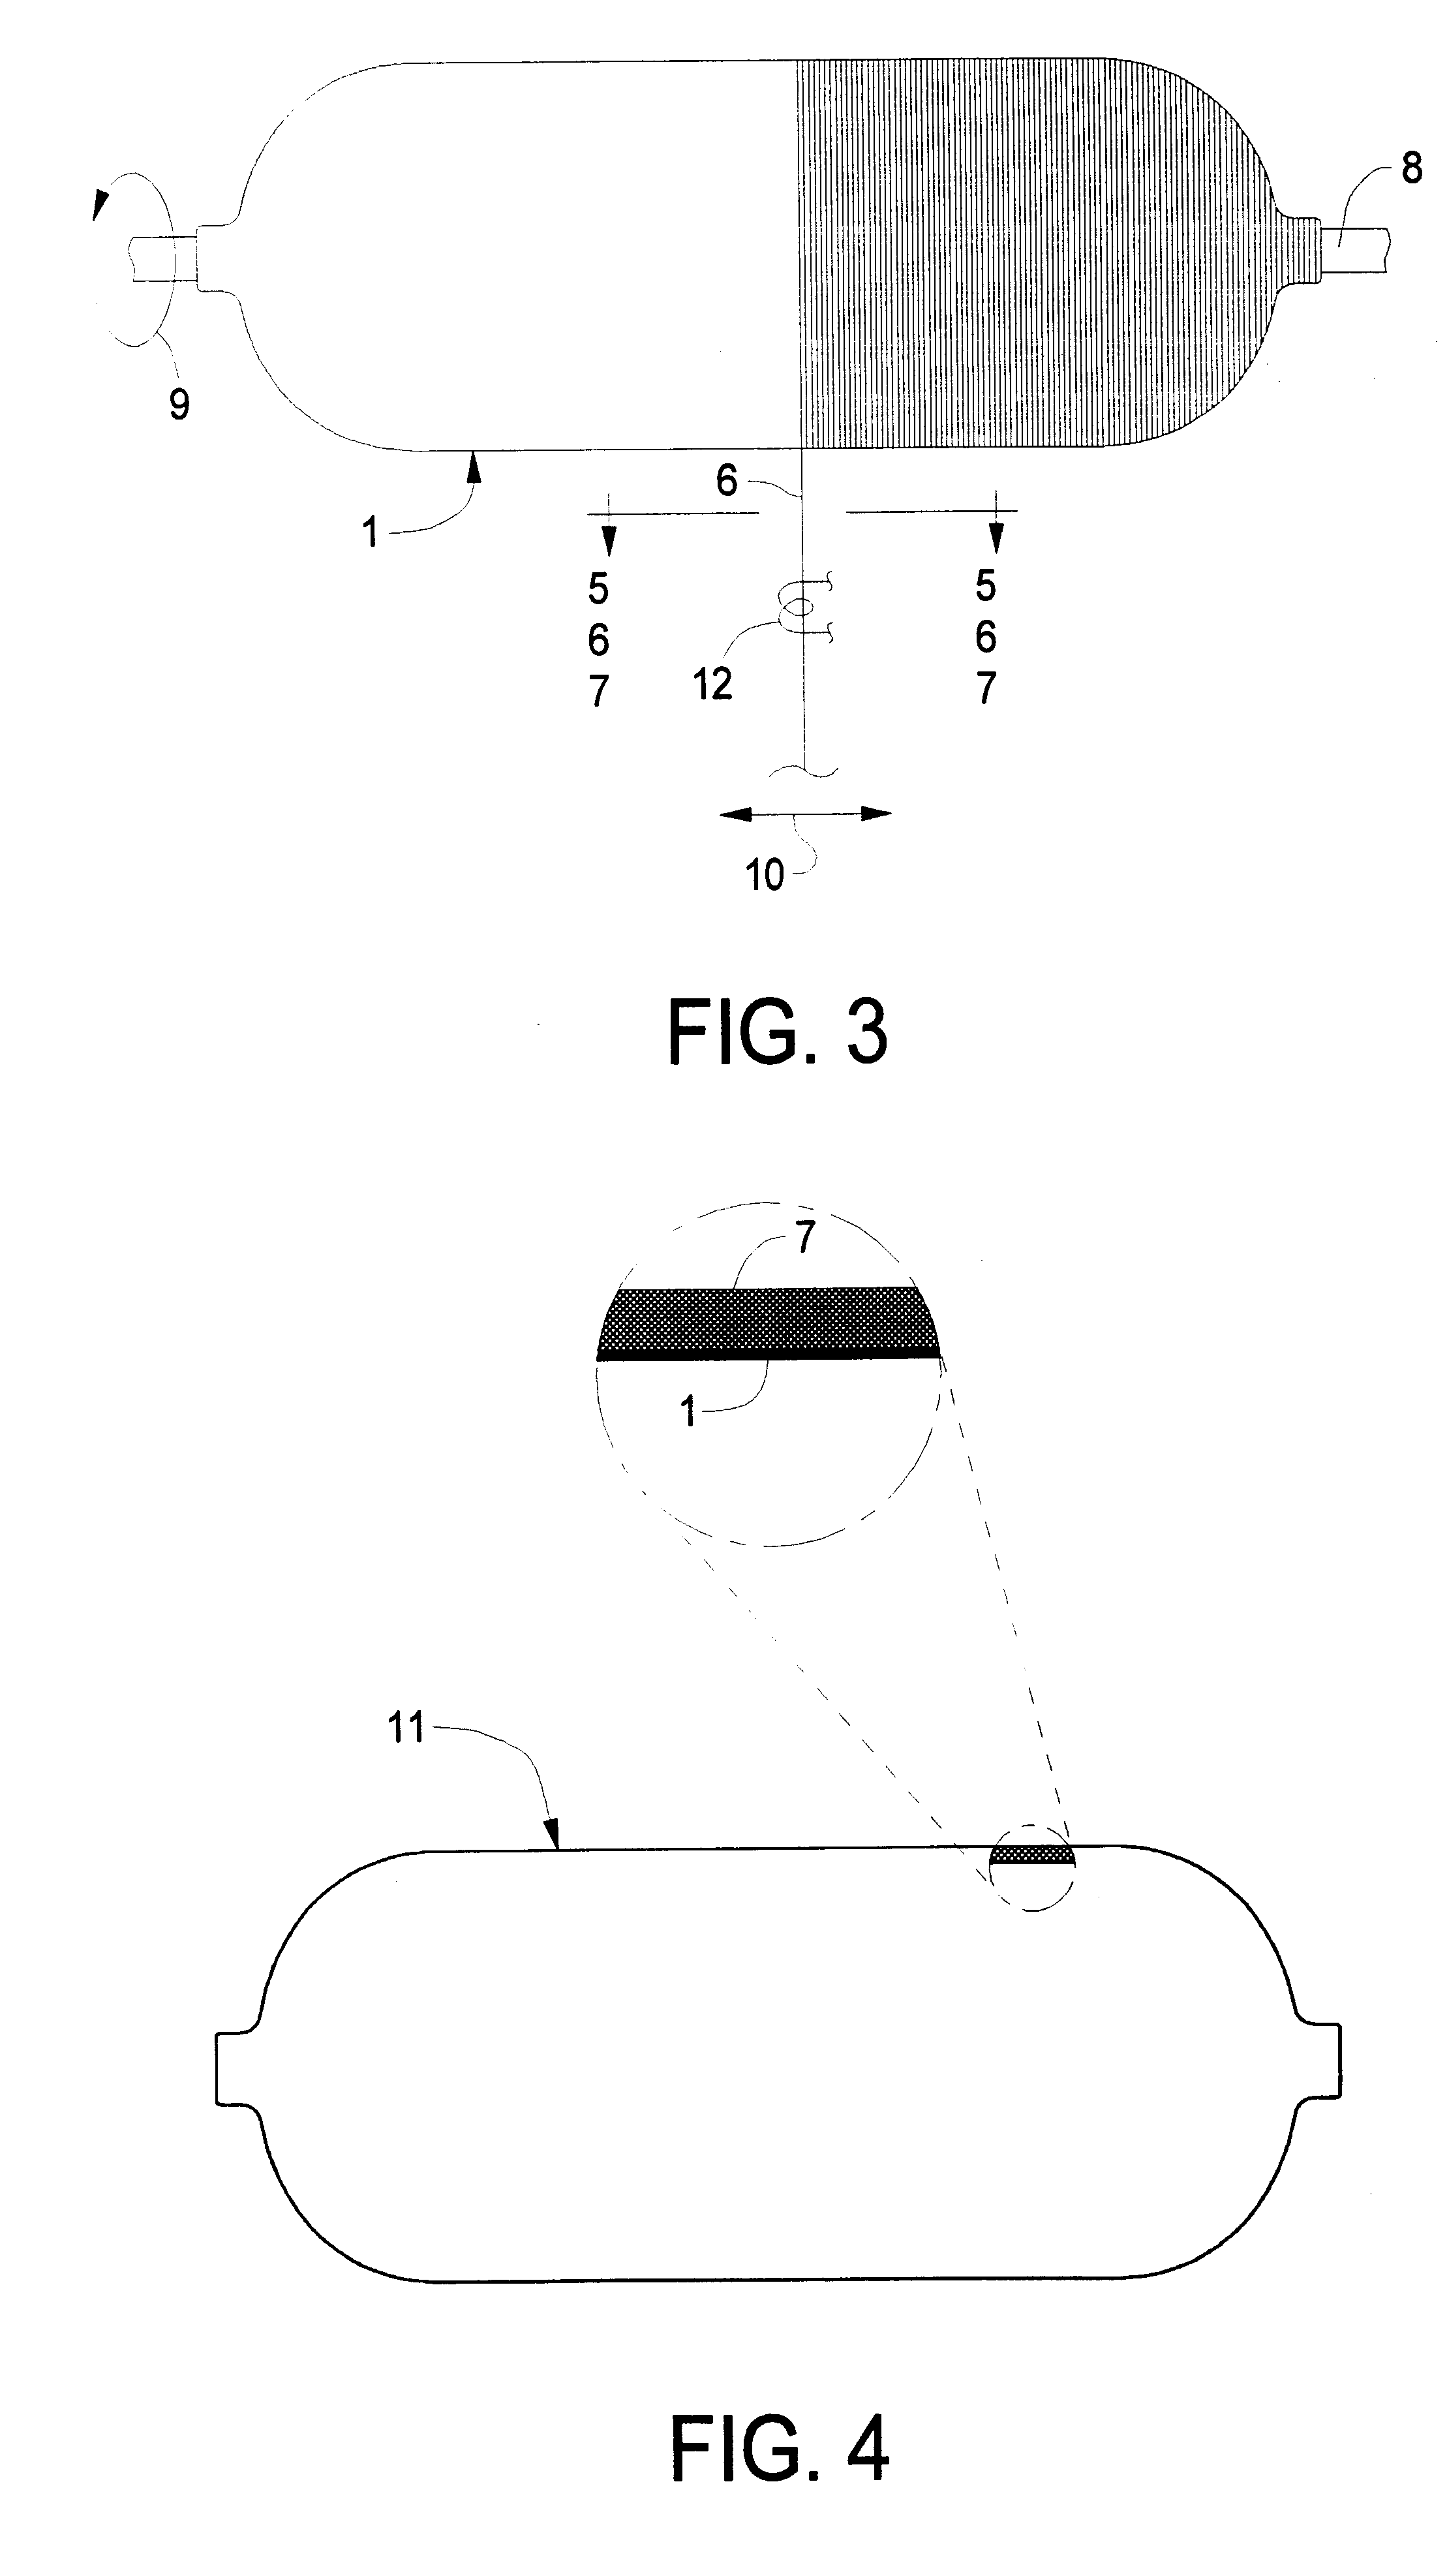 Method for fabricating composite pressure vessels